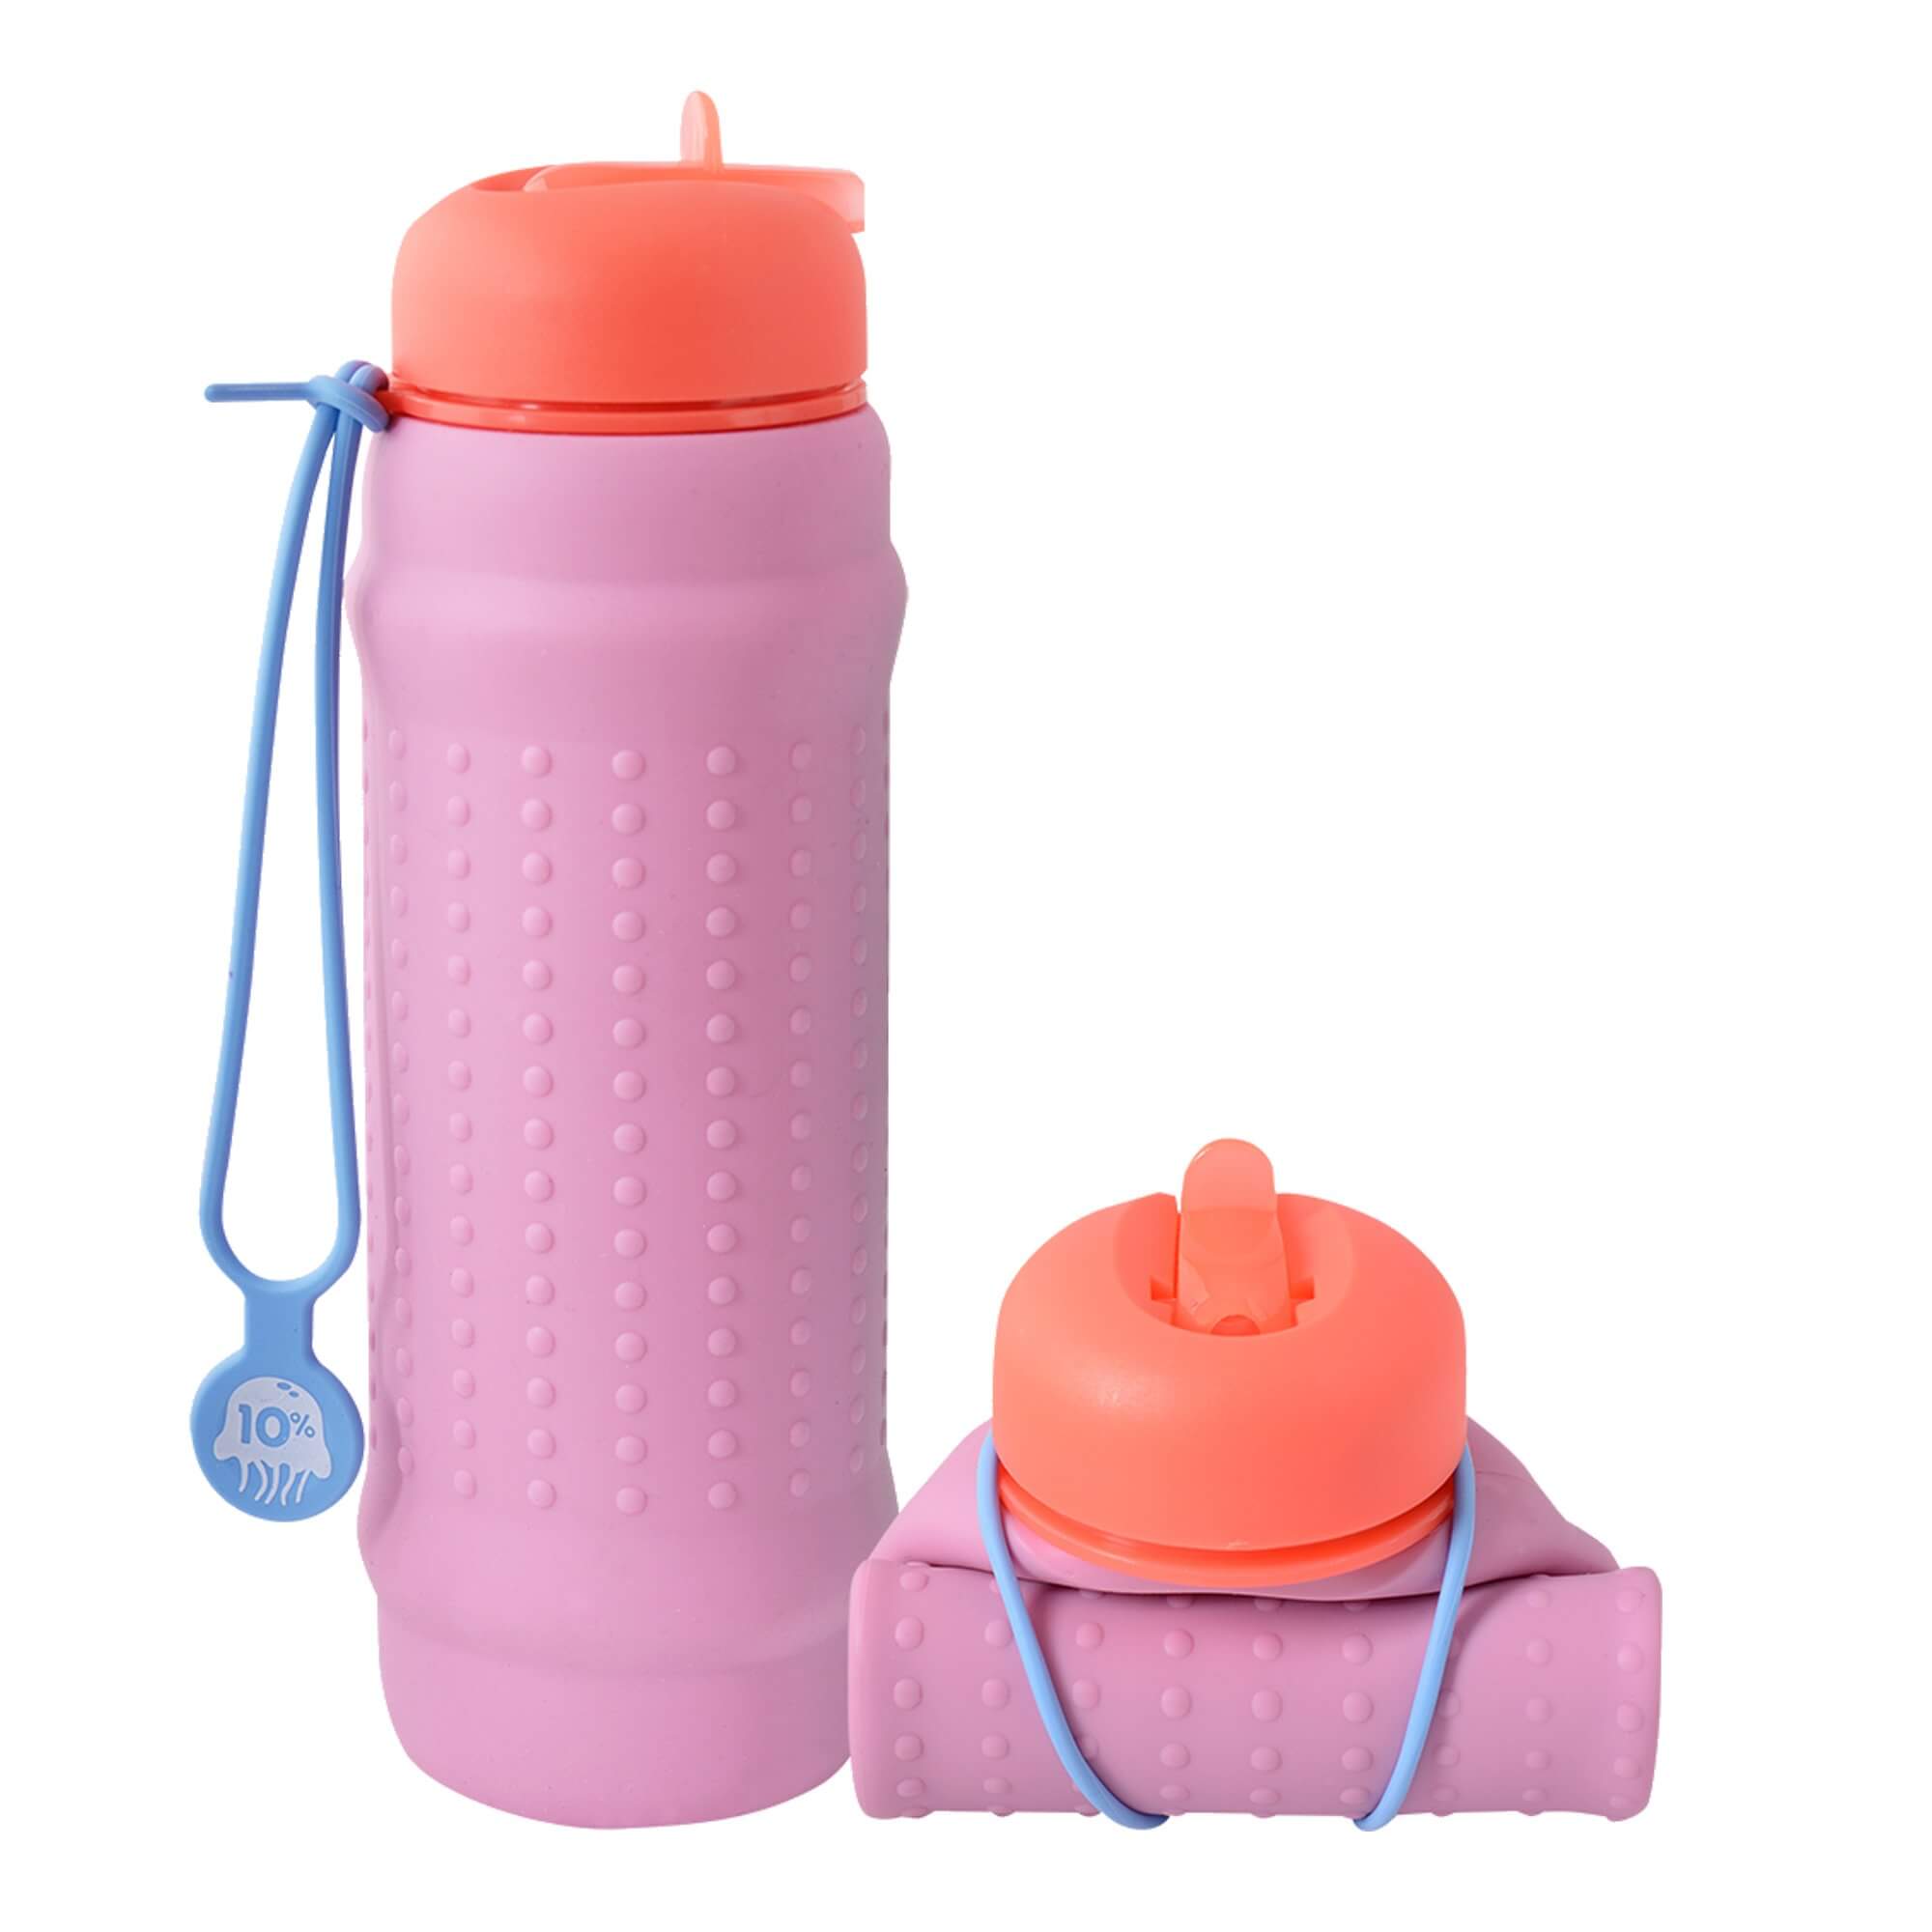 Rolla bottle pink lilac coral lid dusty blue strap rolled tall |The Home Maven